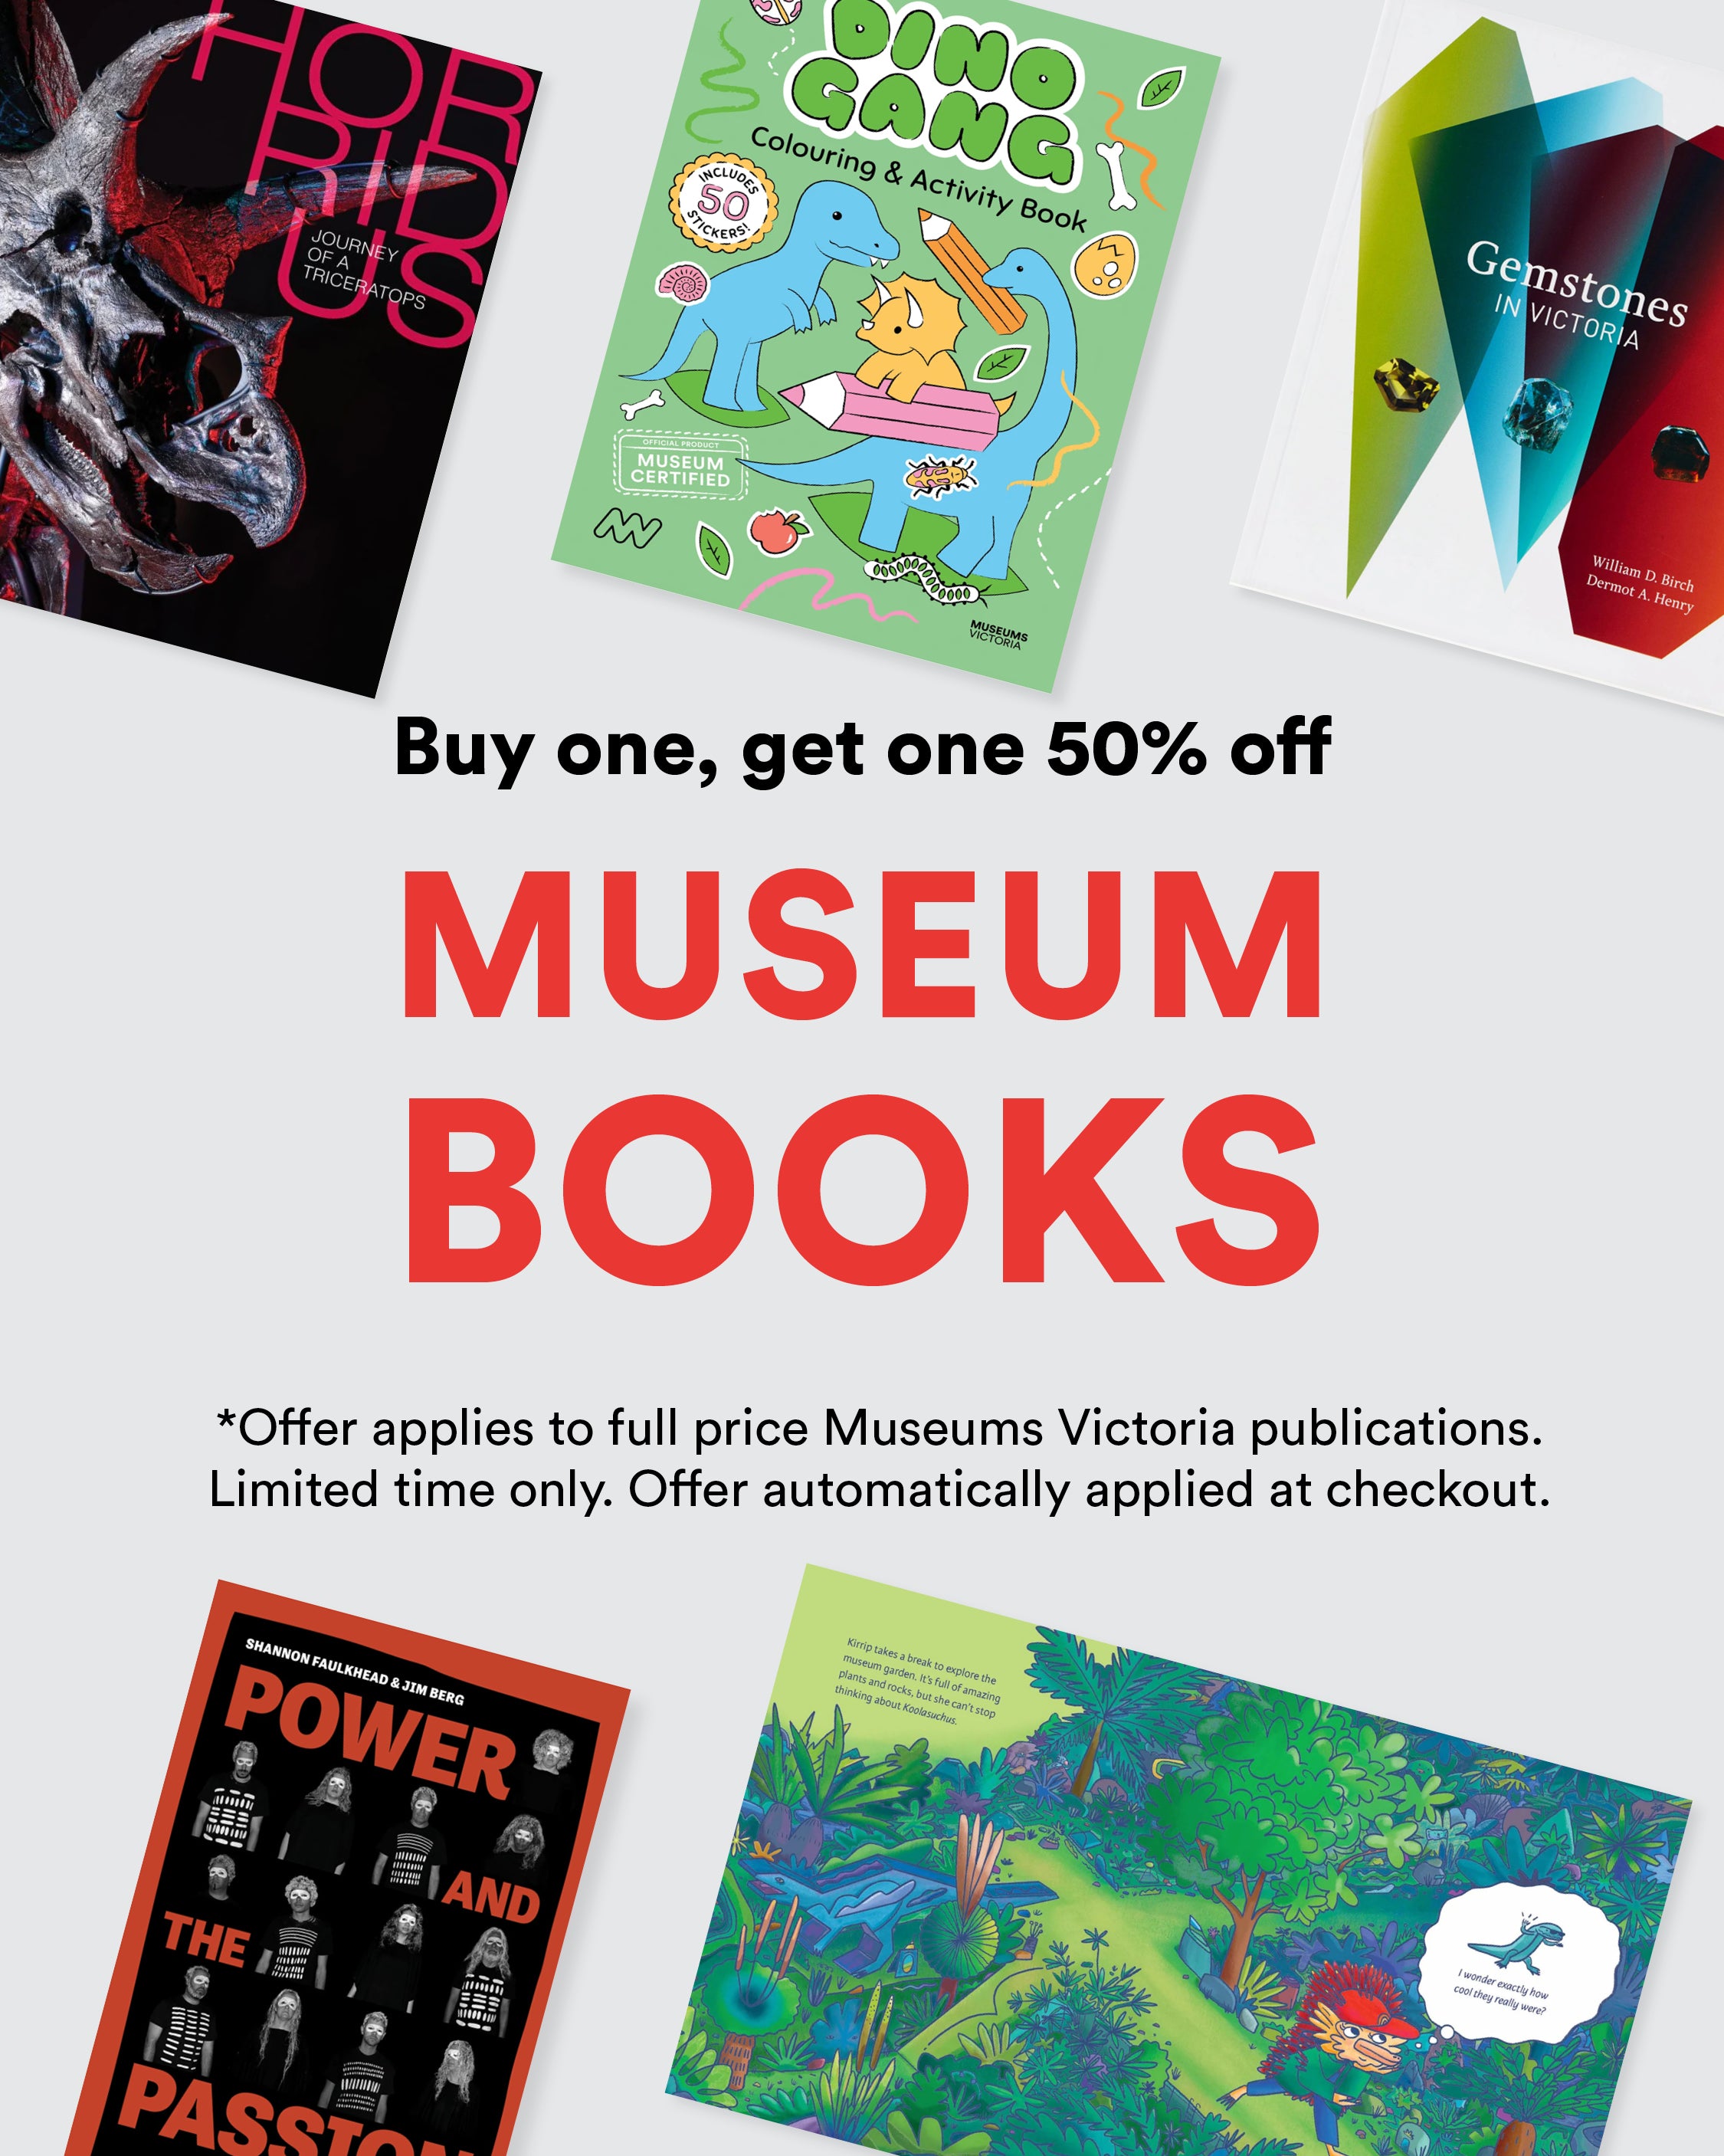 Museum_Books_OFFER_flat_lay_template_Mobile_banner_red_black.jpg